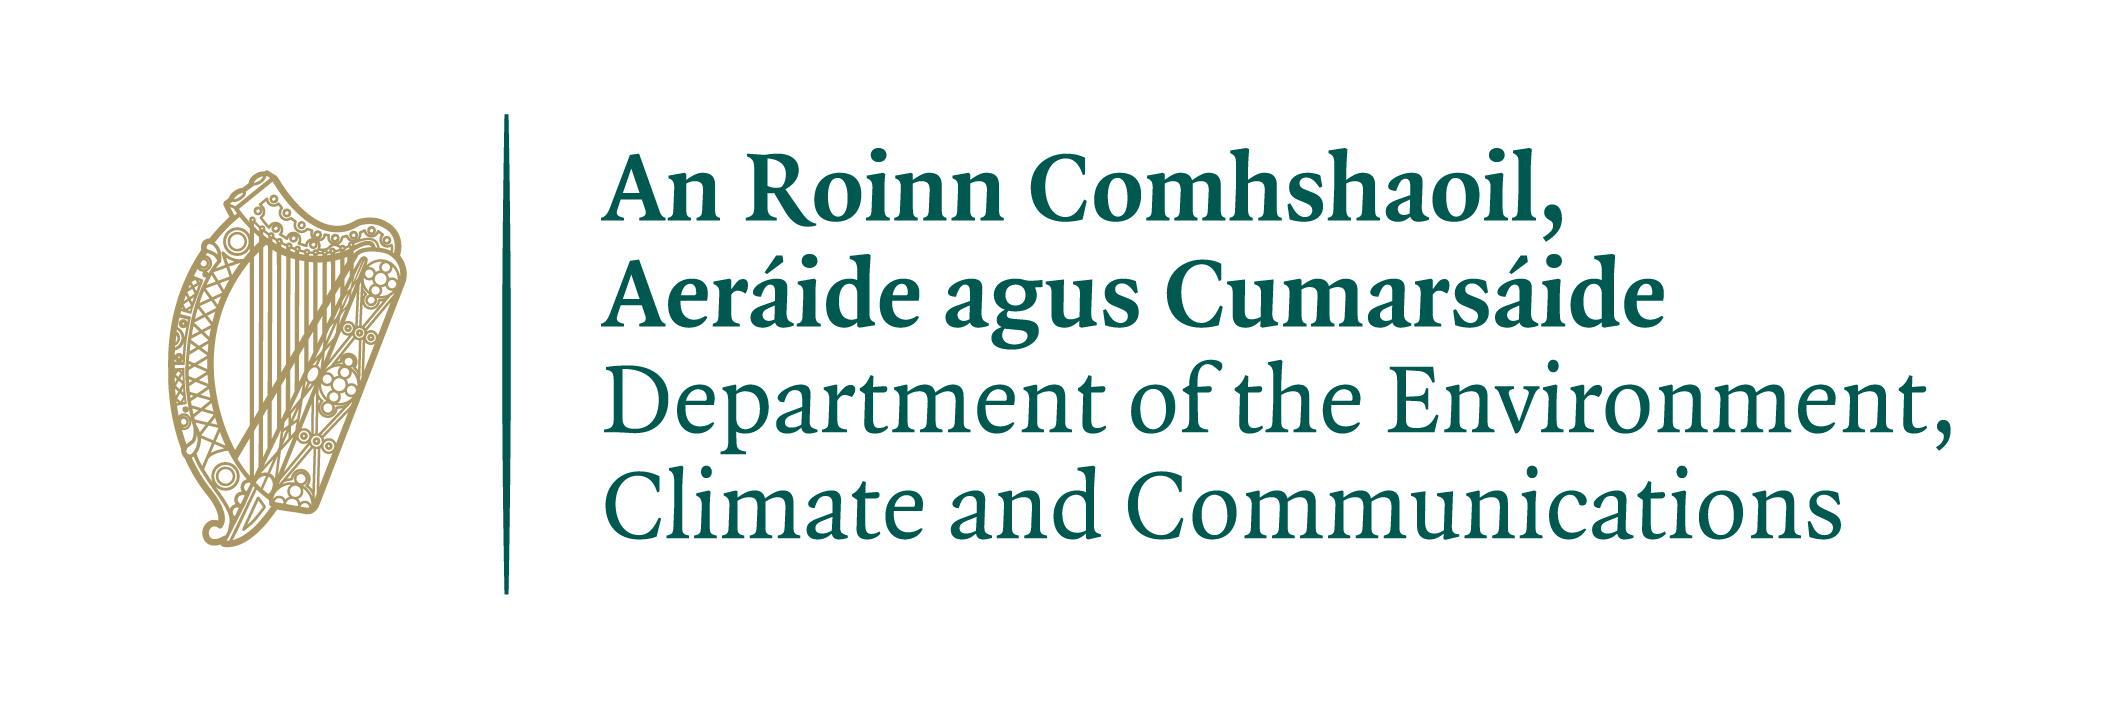 department-of-the-environment-climate-and-communications